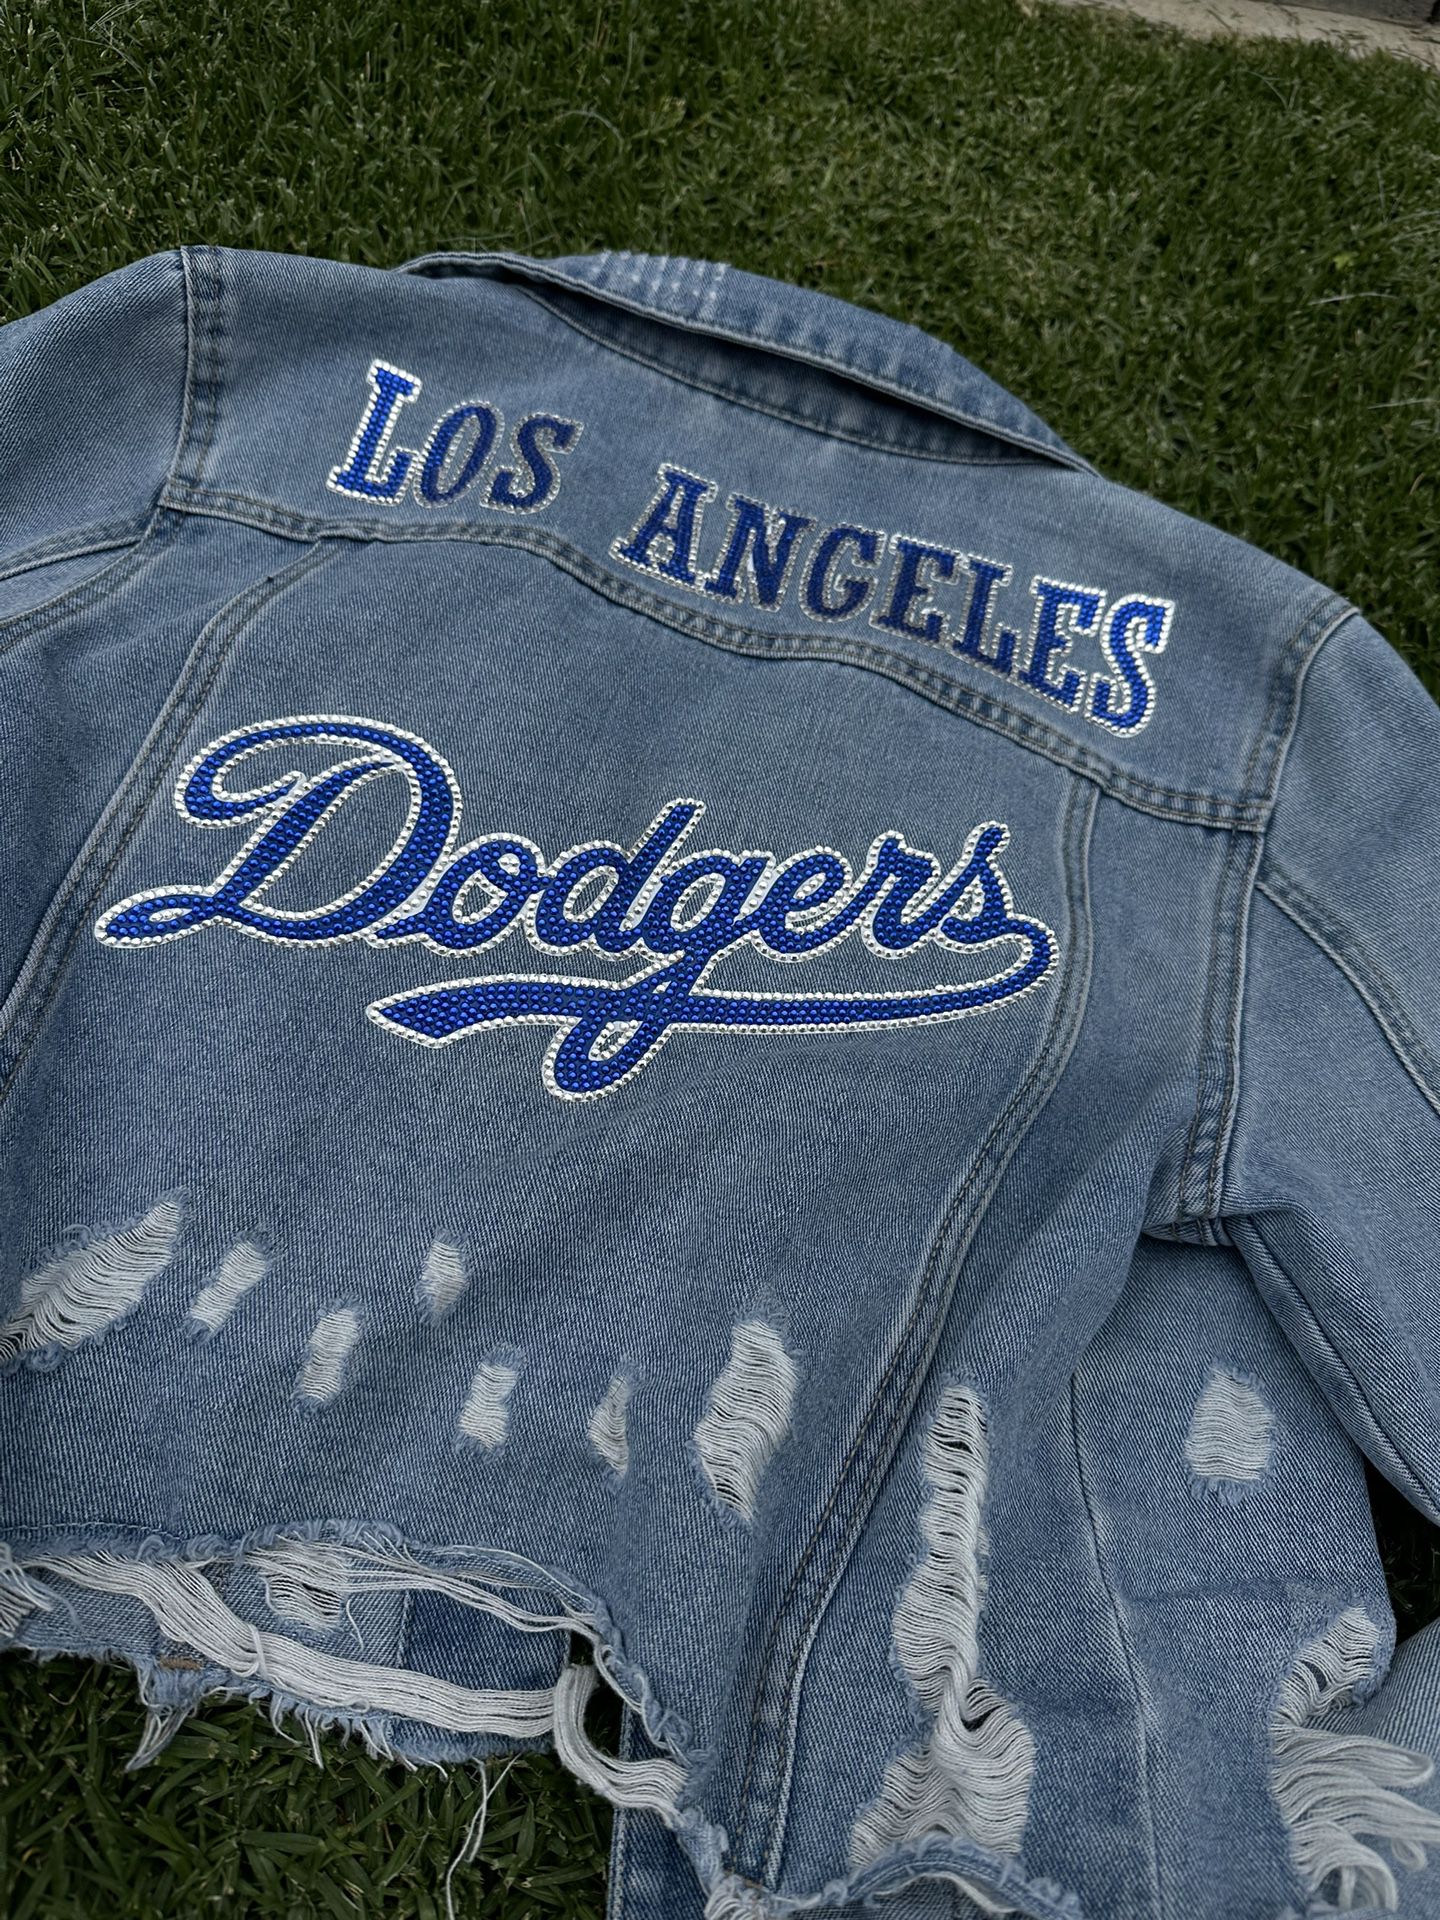 Dodgers Jean Jacket. Bedazzle for Sale in Long Beach, CA - OfferUp